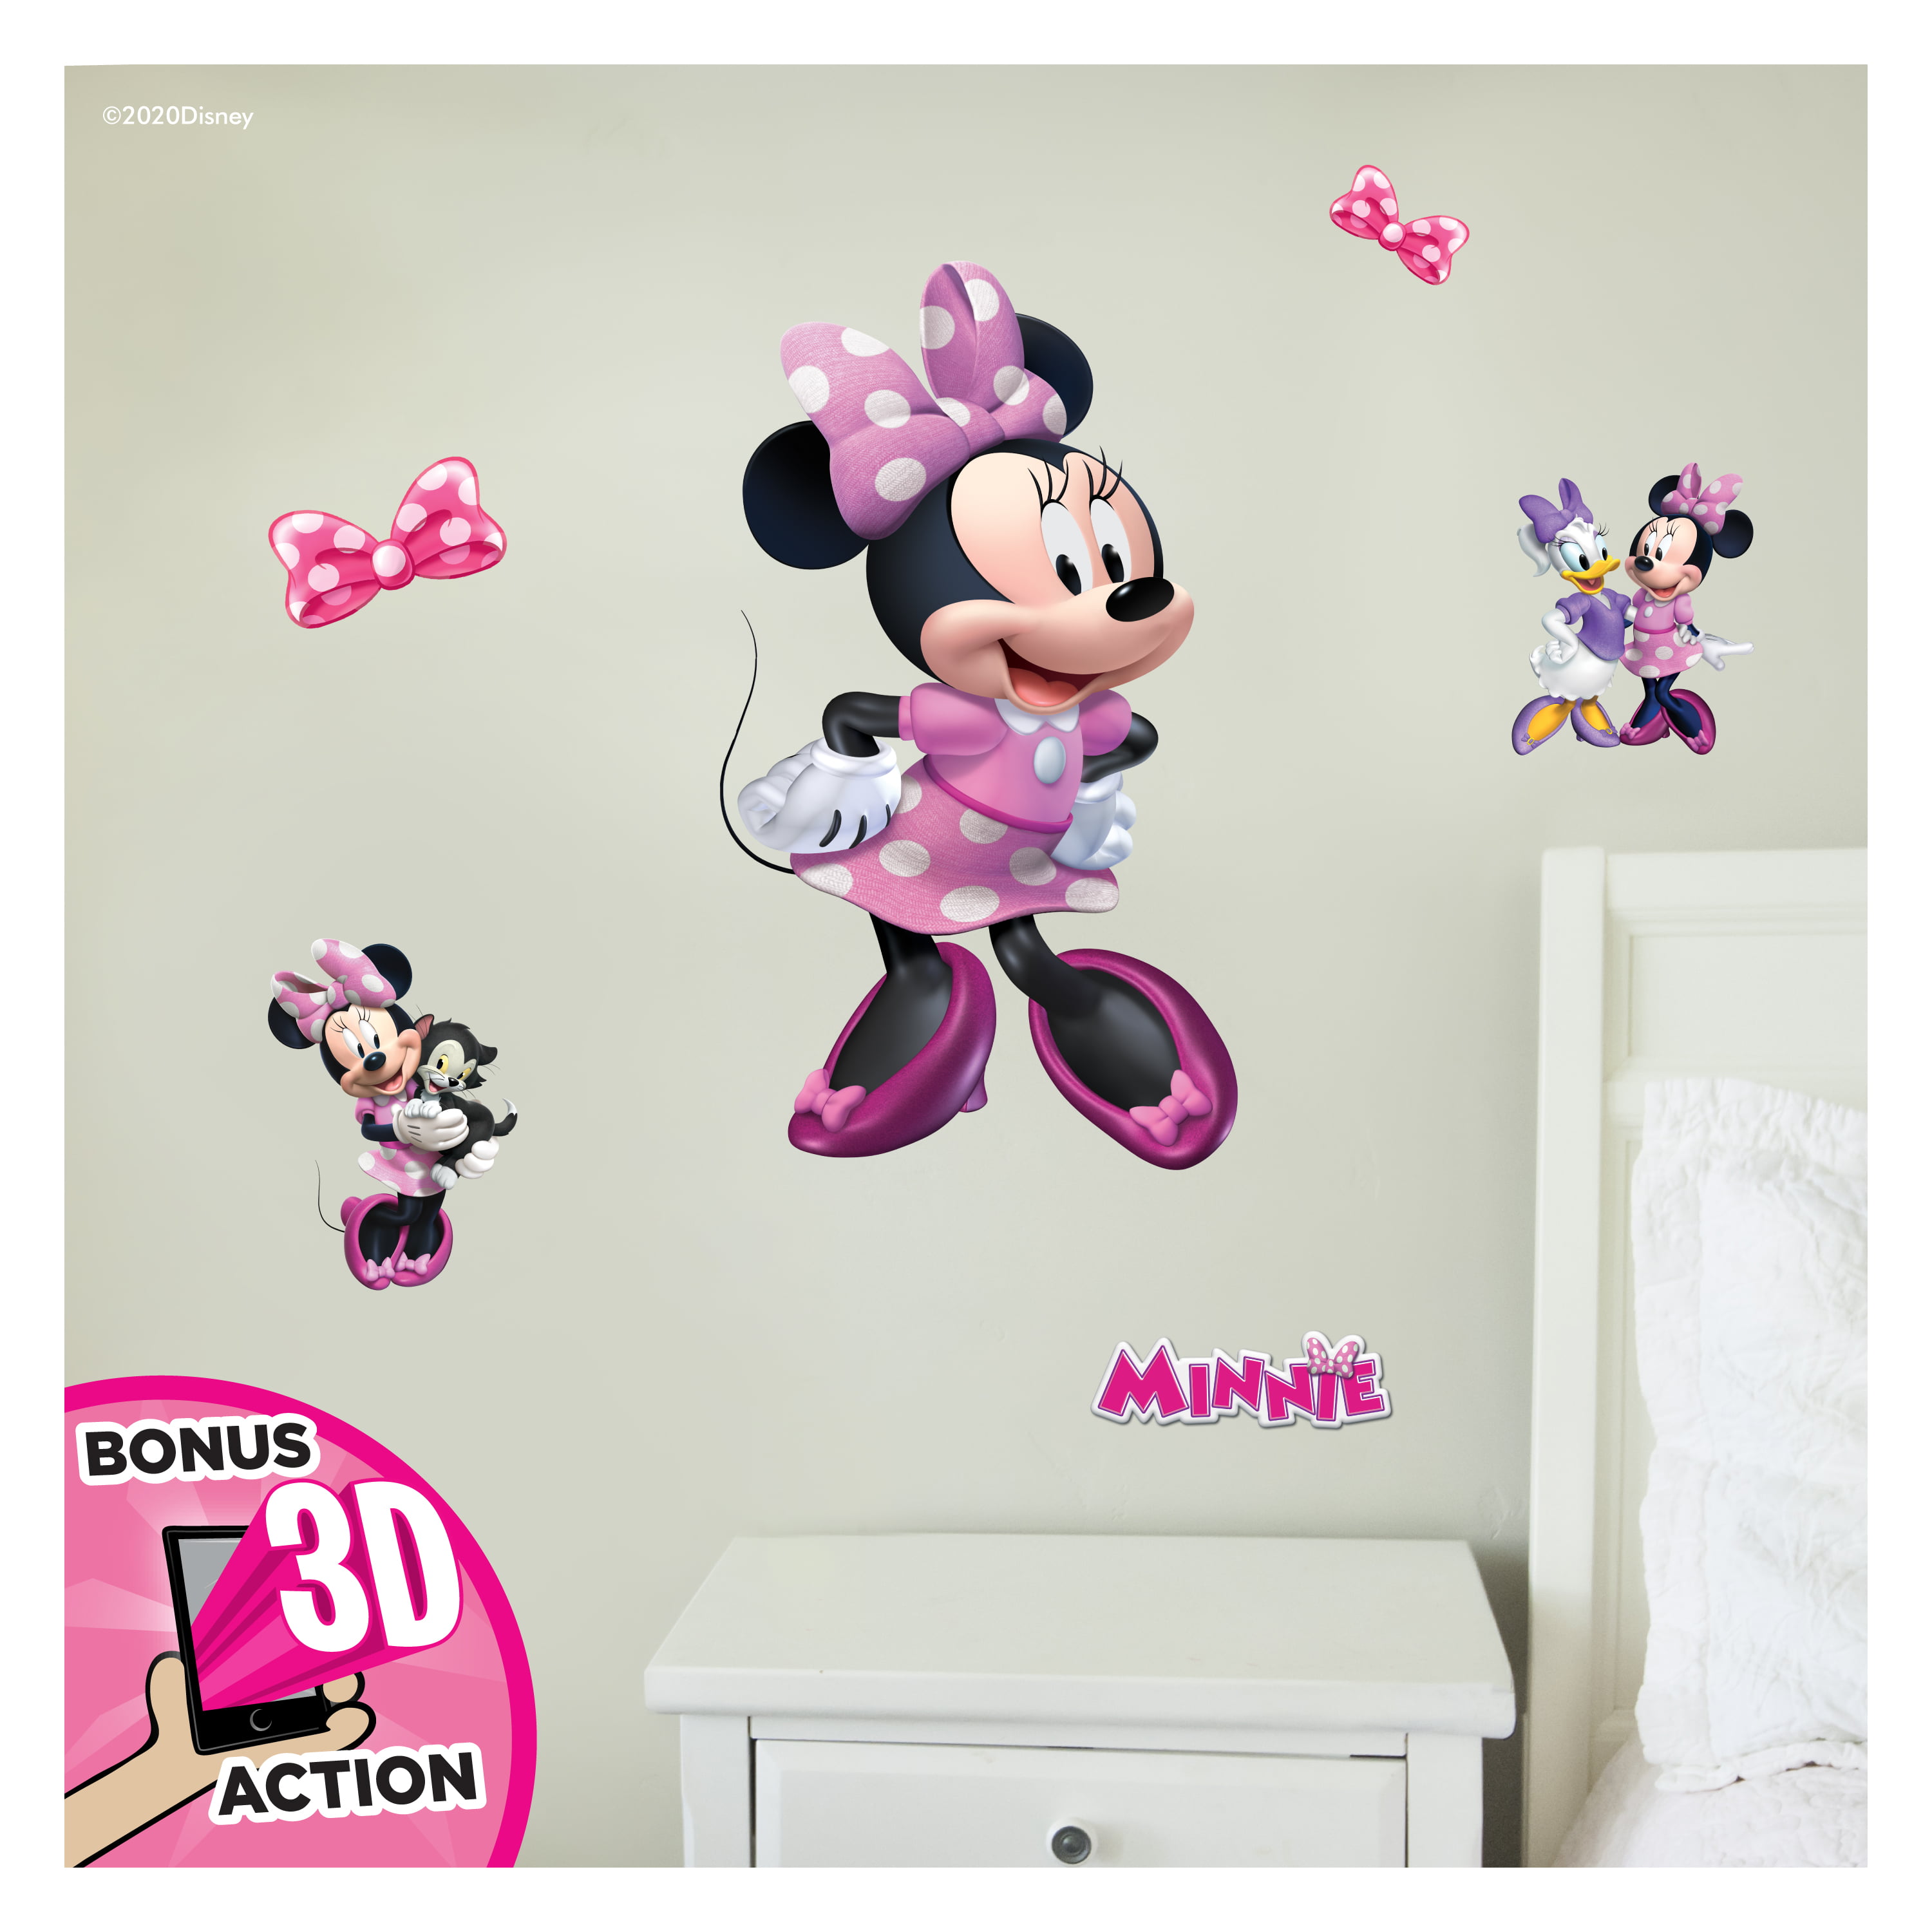 Disney MINNIE MOUSE wall stickers MURAL decal Clubhouse 40" big room decor 